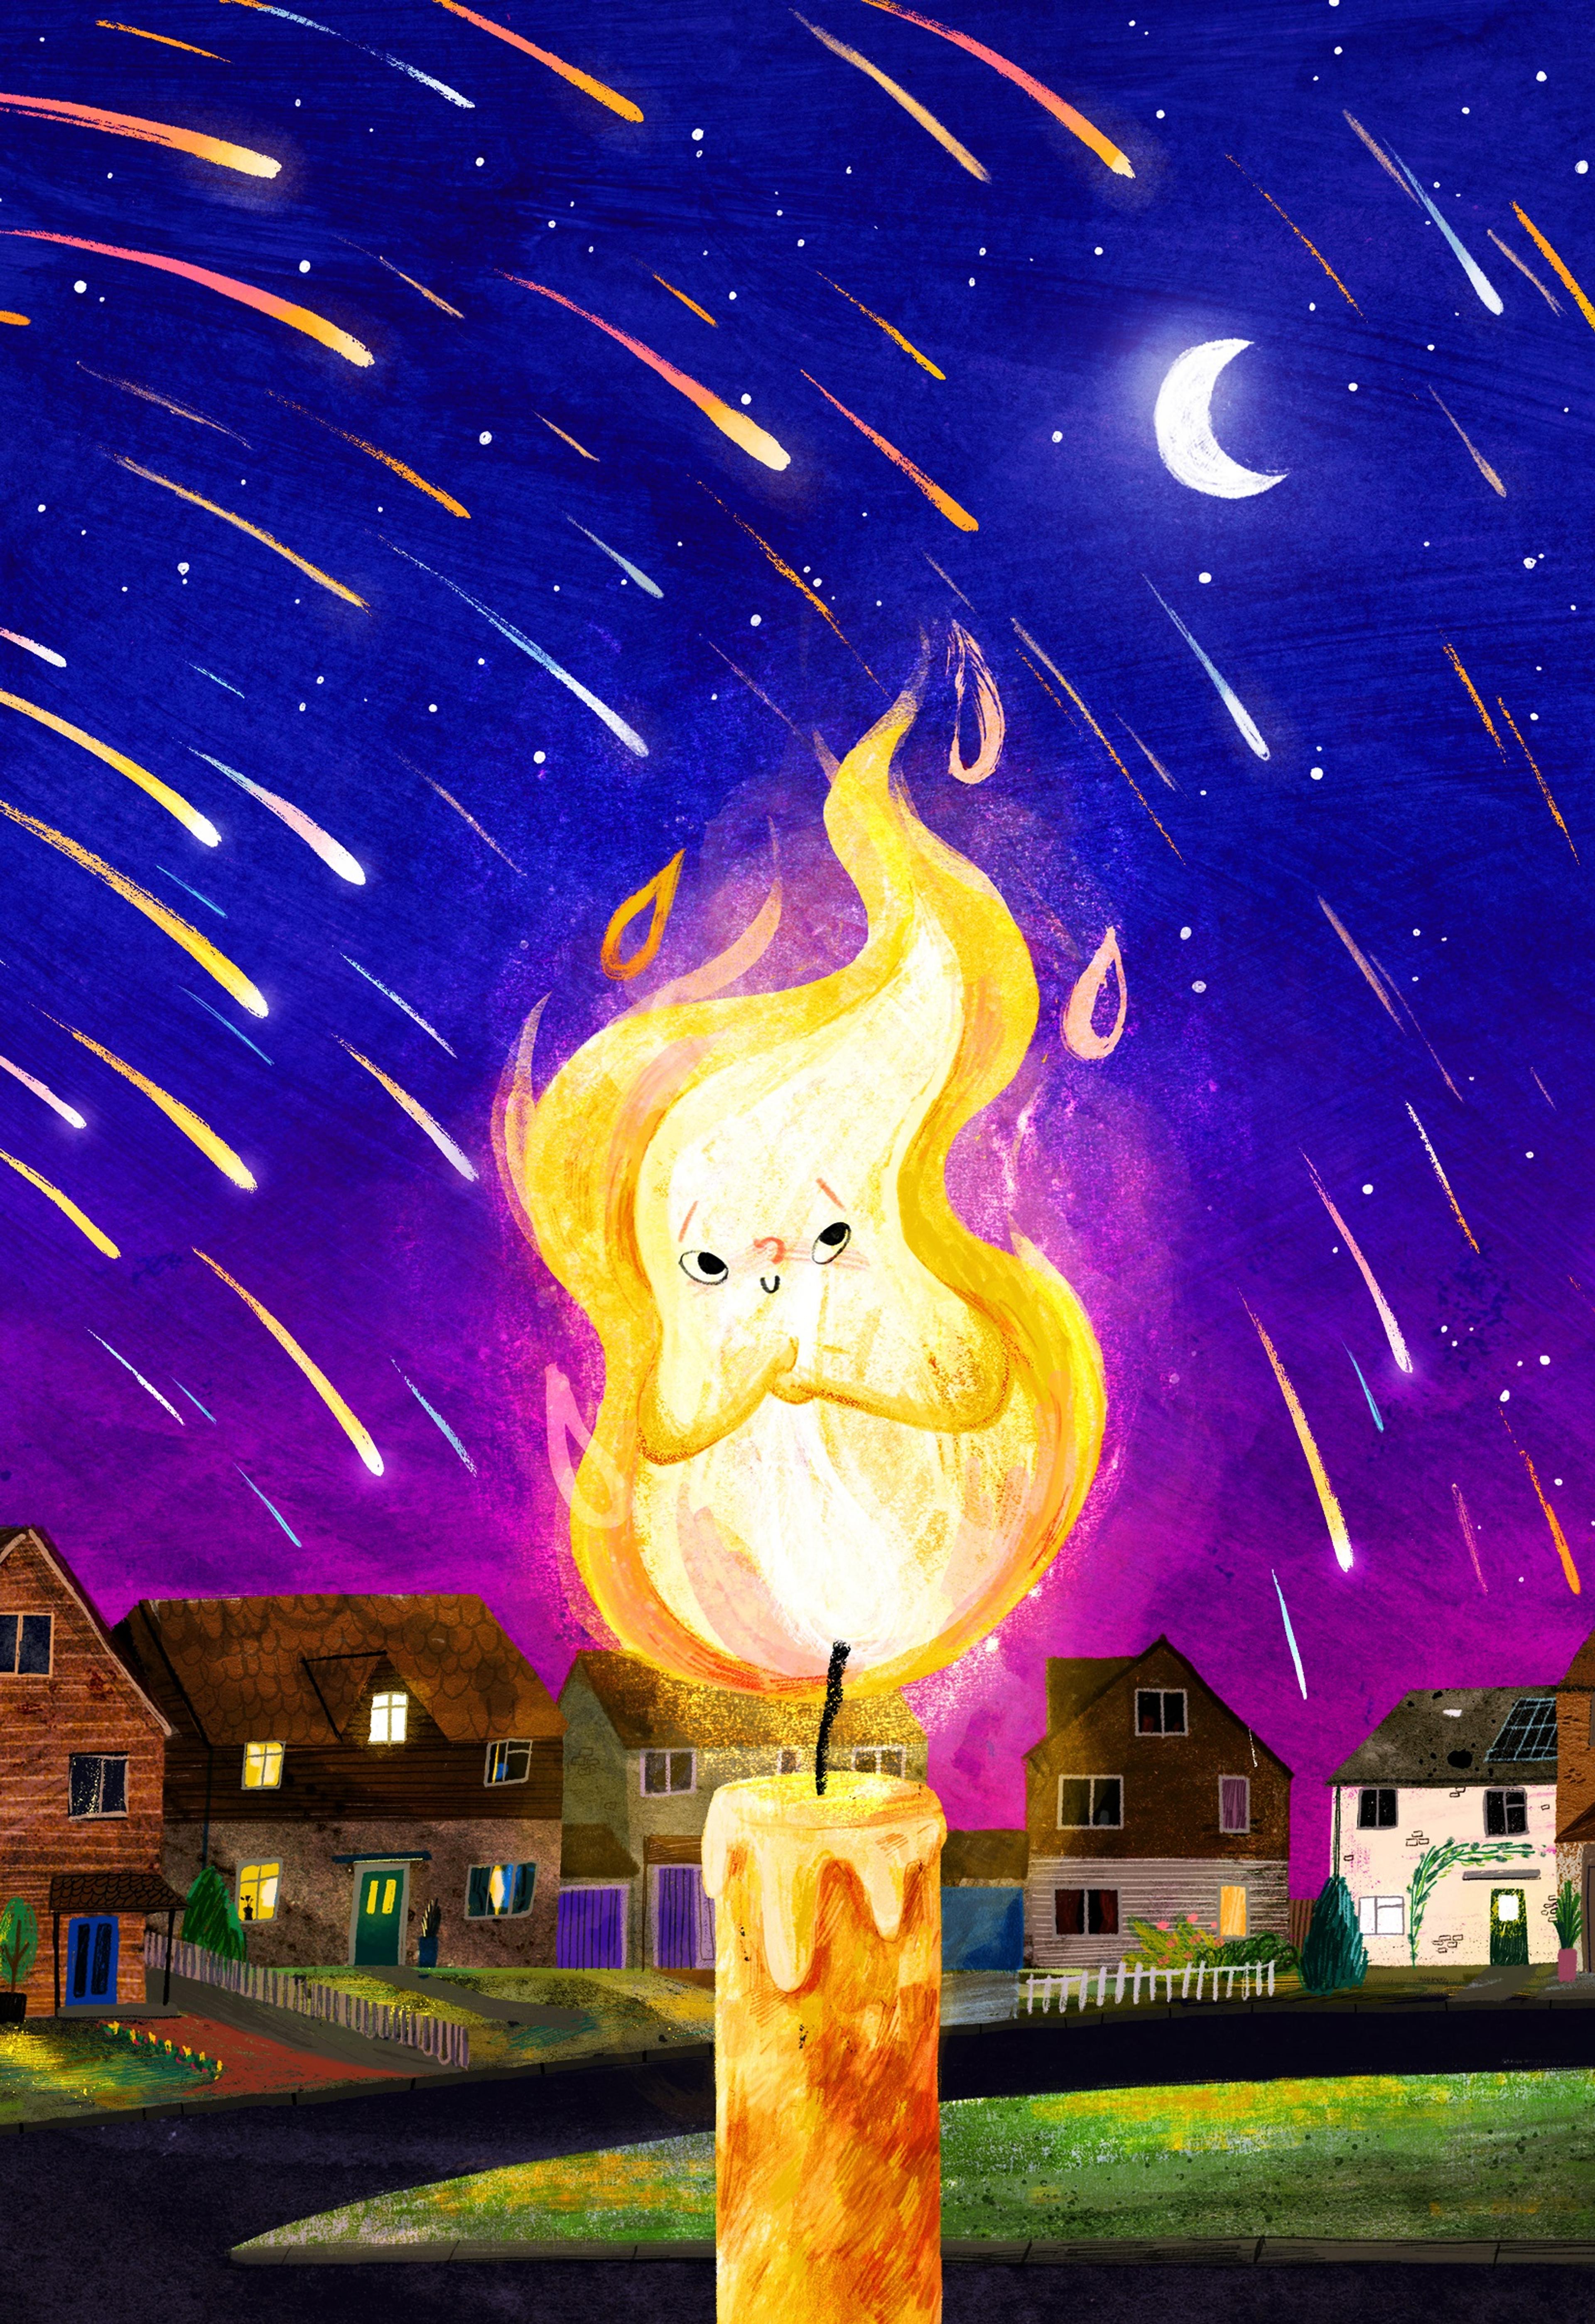 Illustration of a flame character, in front of a row of houses